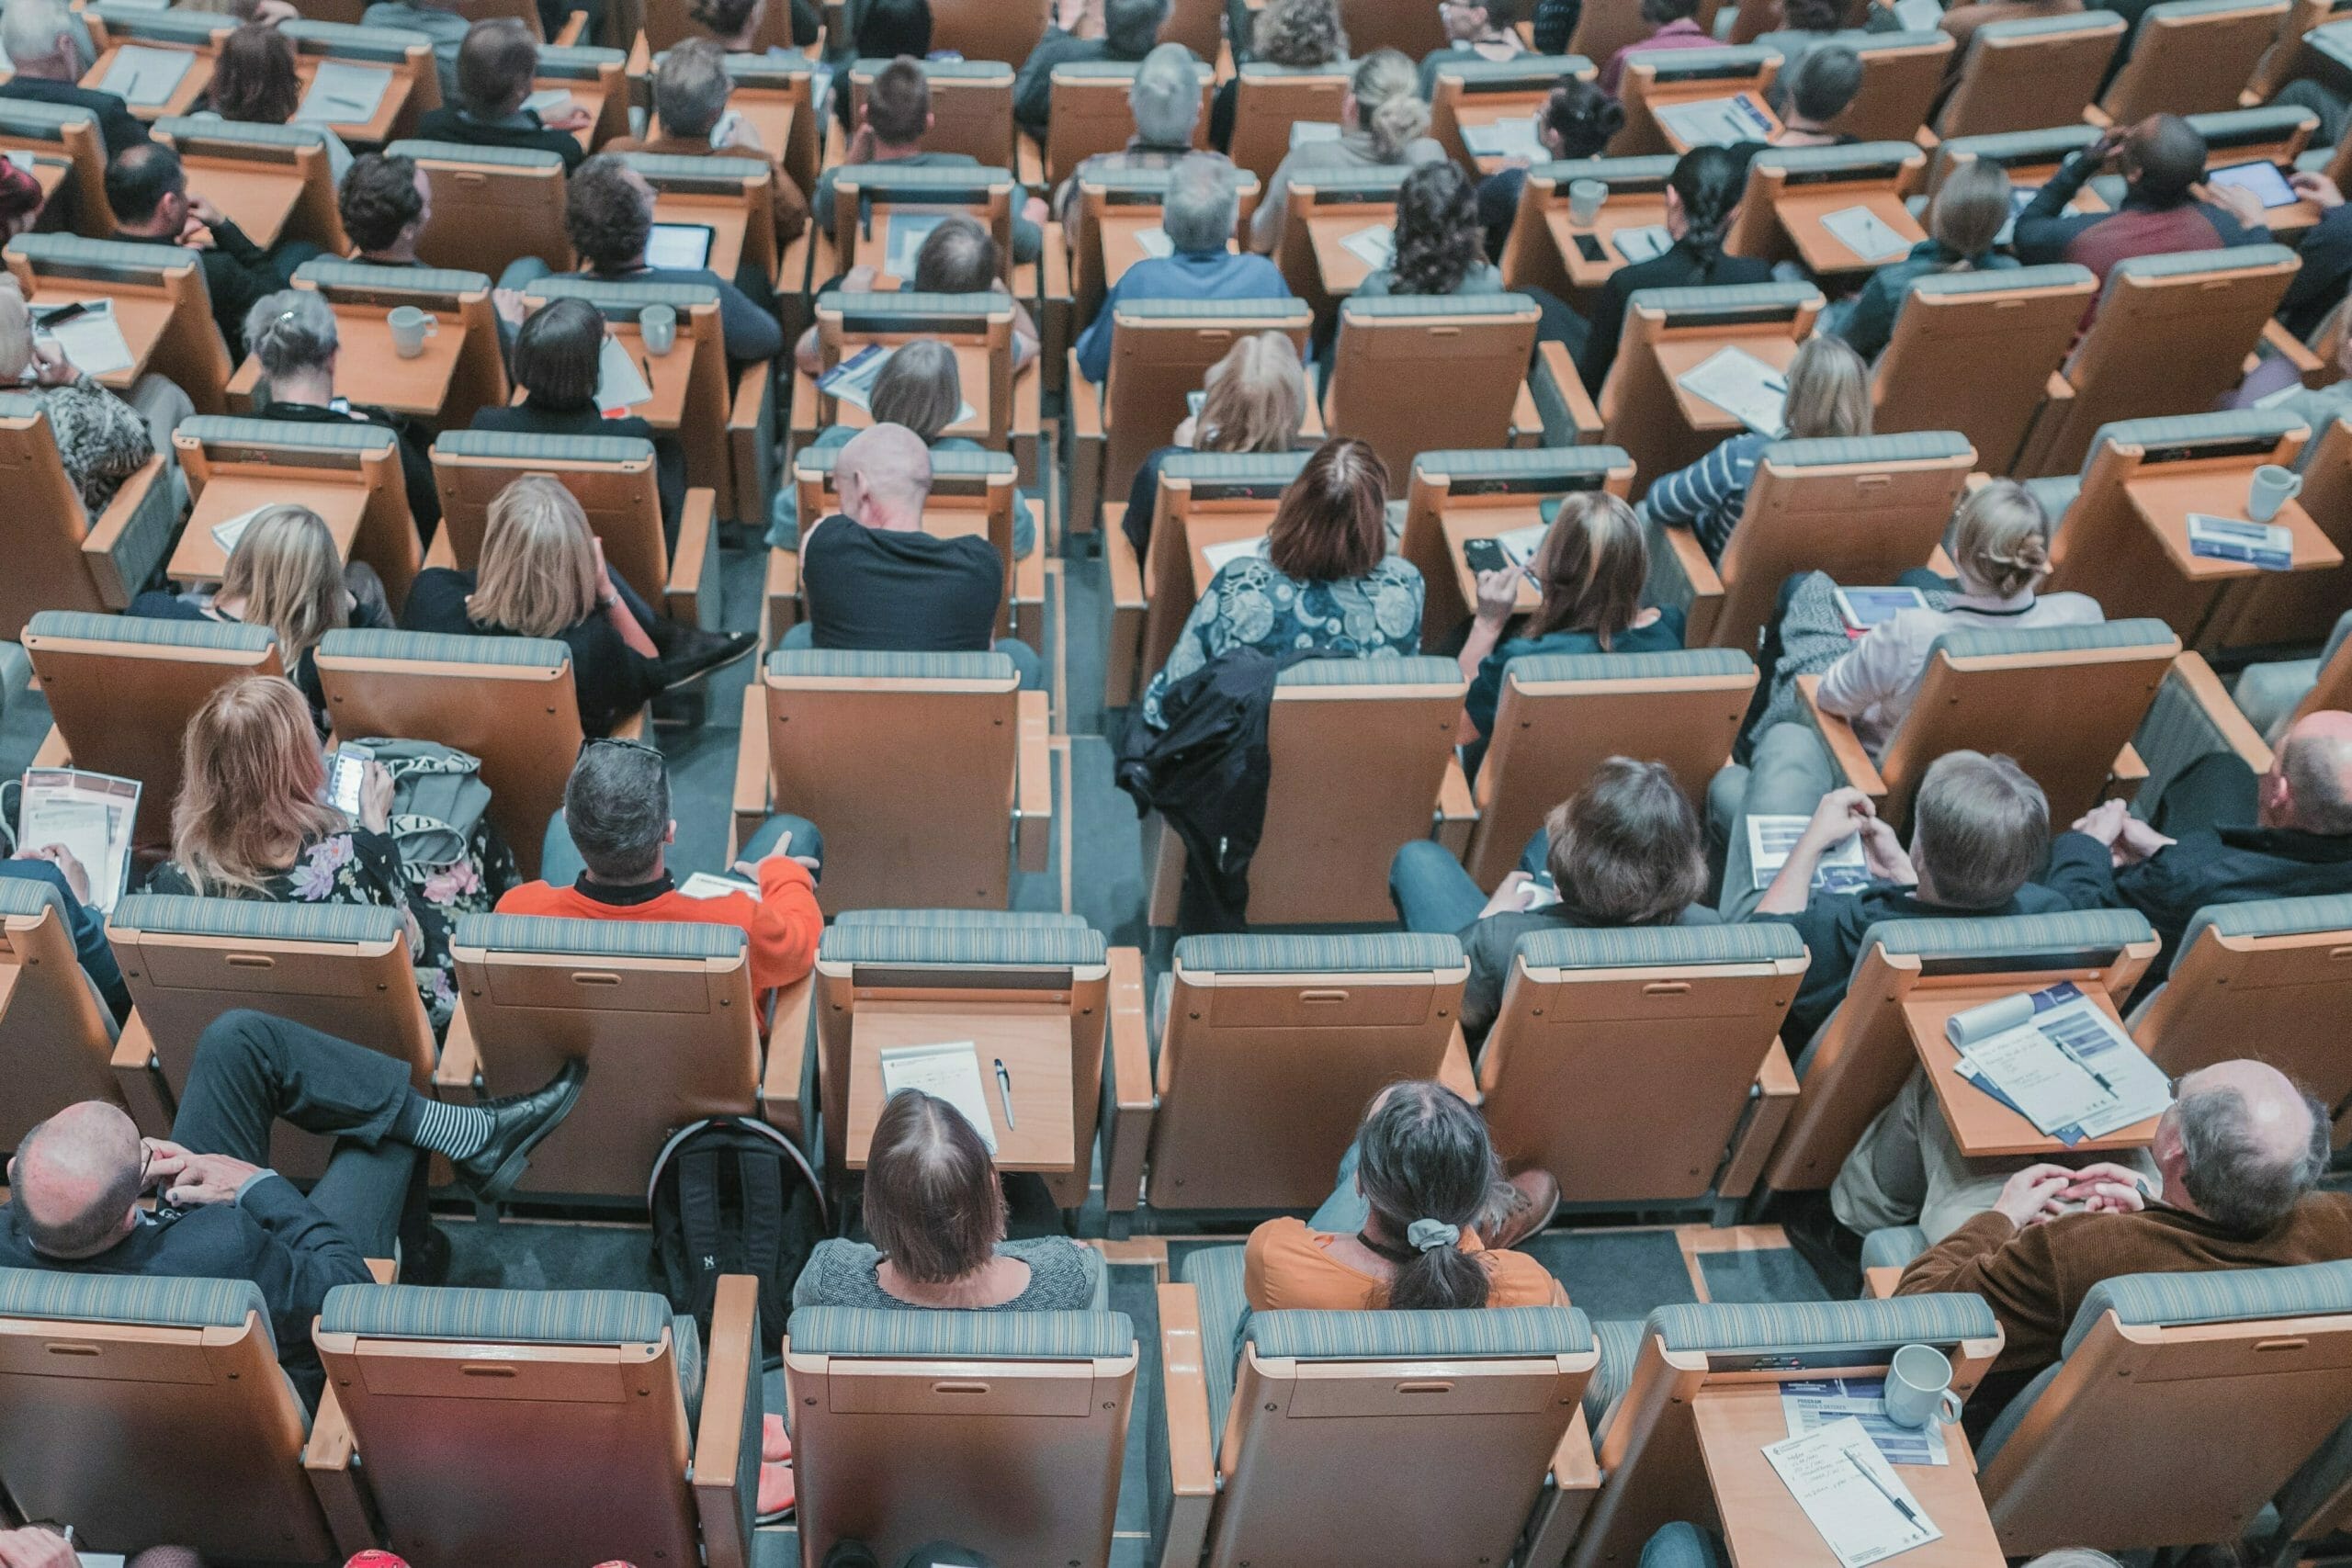 Image shows a lecture hall crowded with students